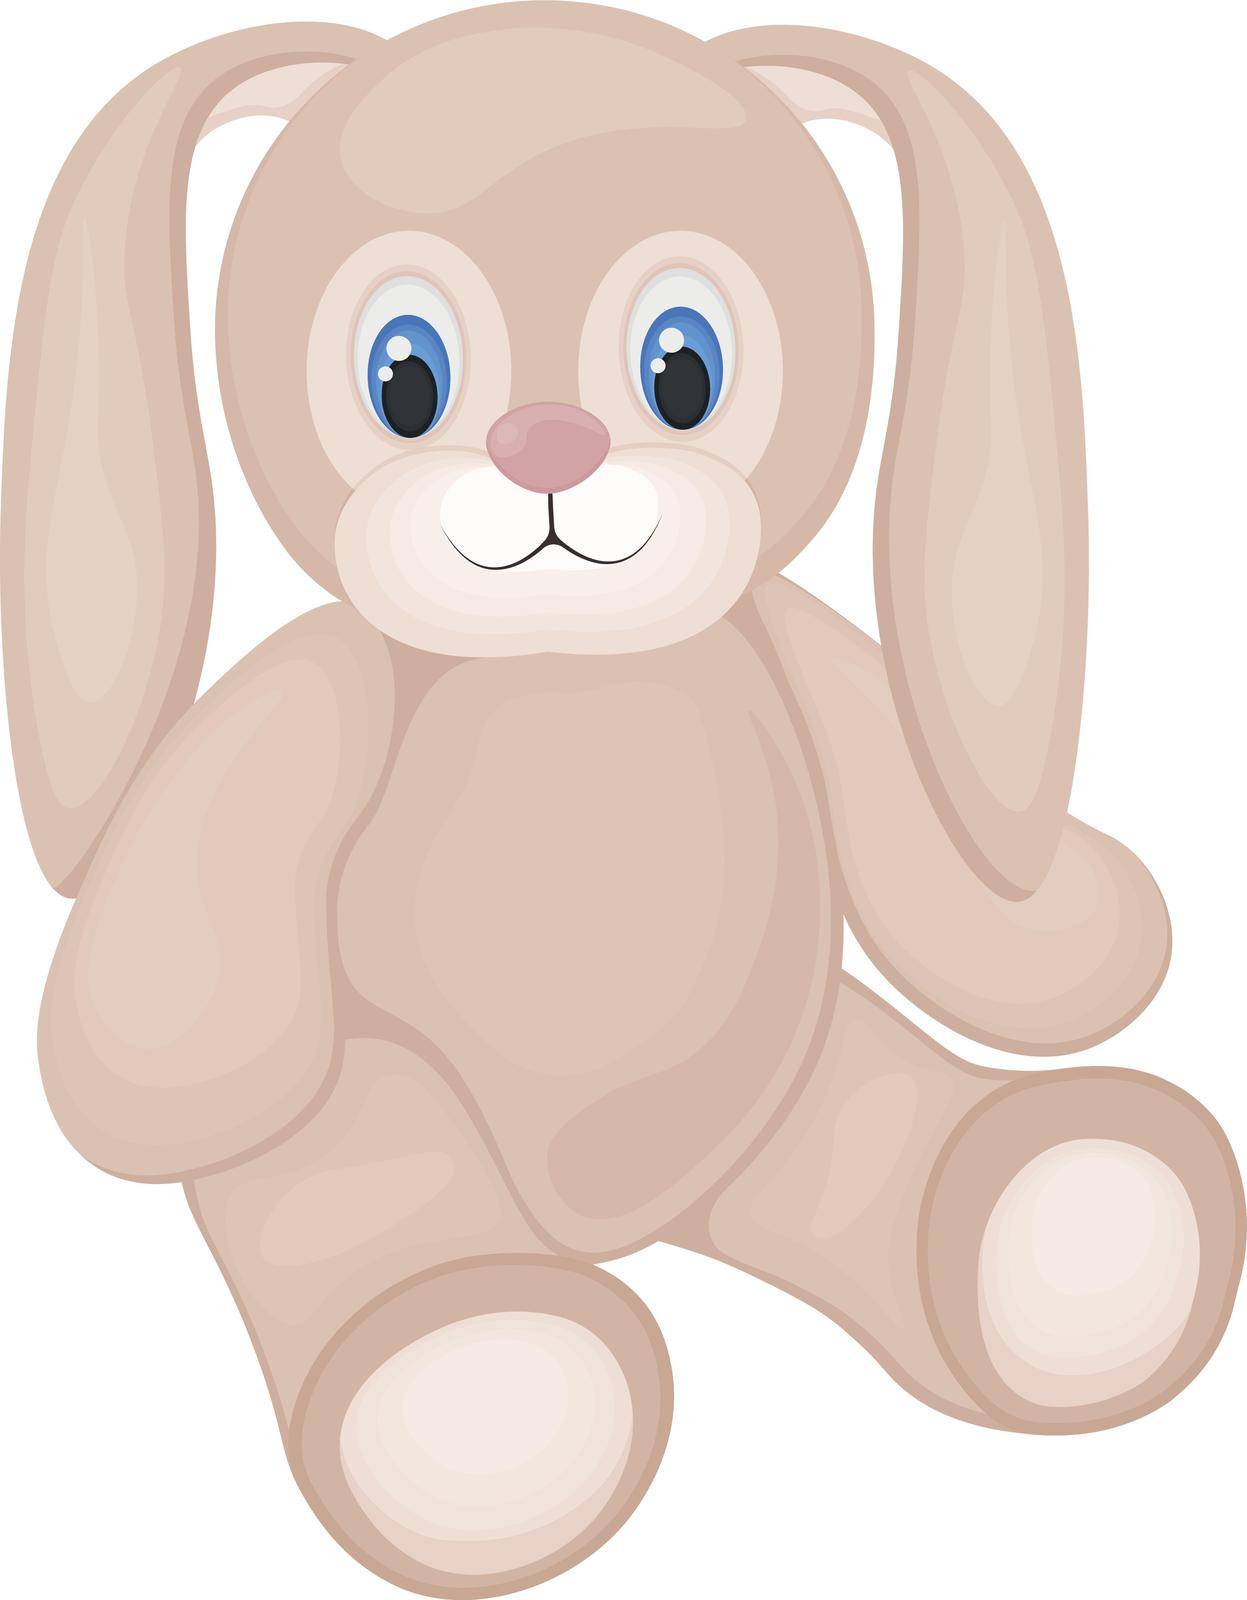 Cute bunny toy. A smiling stuffed rabbit is sitting on the floor. A stuffed rabbit. Vector illustration isolated on a white background.